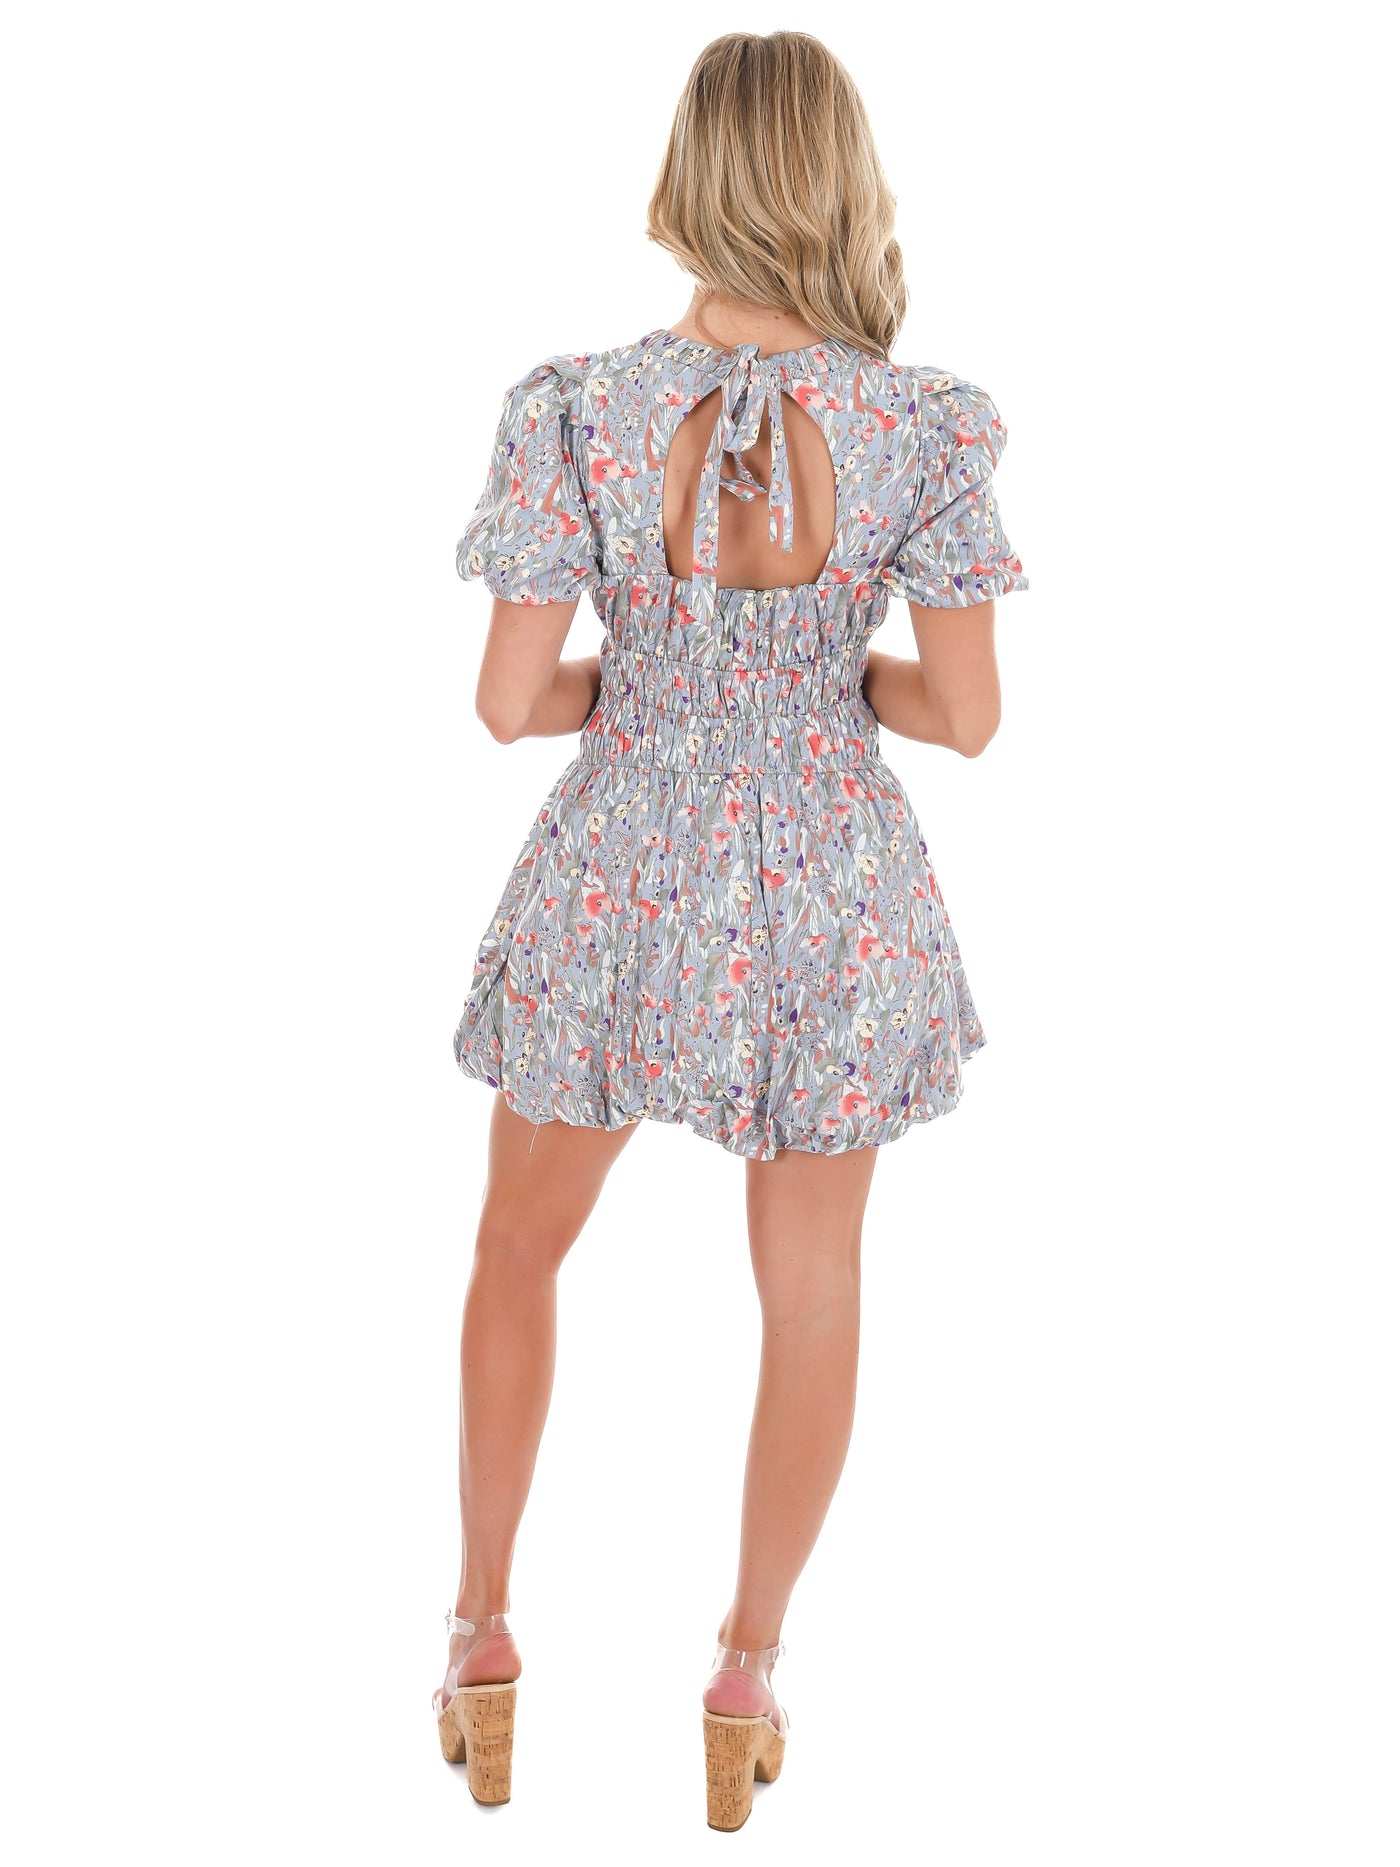 Rolling With It Floral Mini Dress